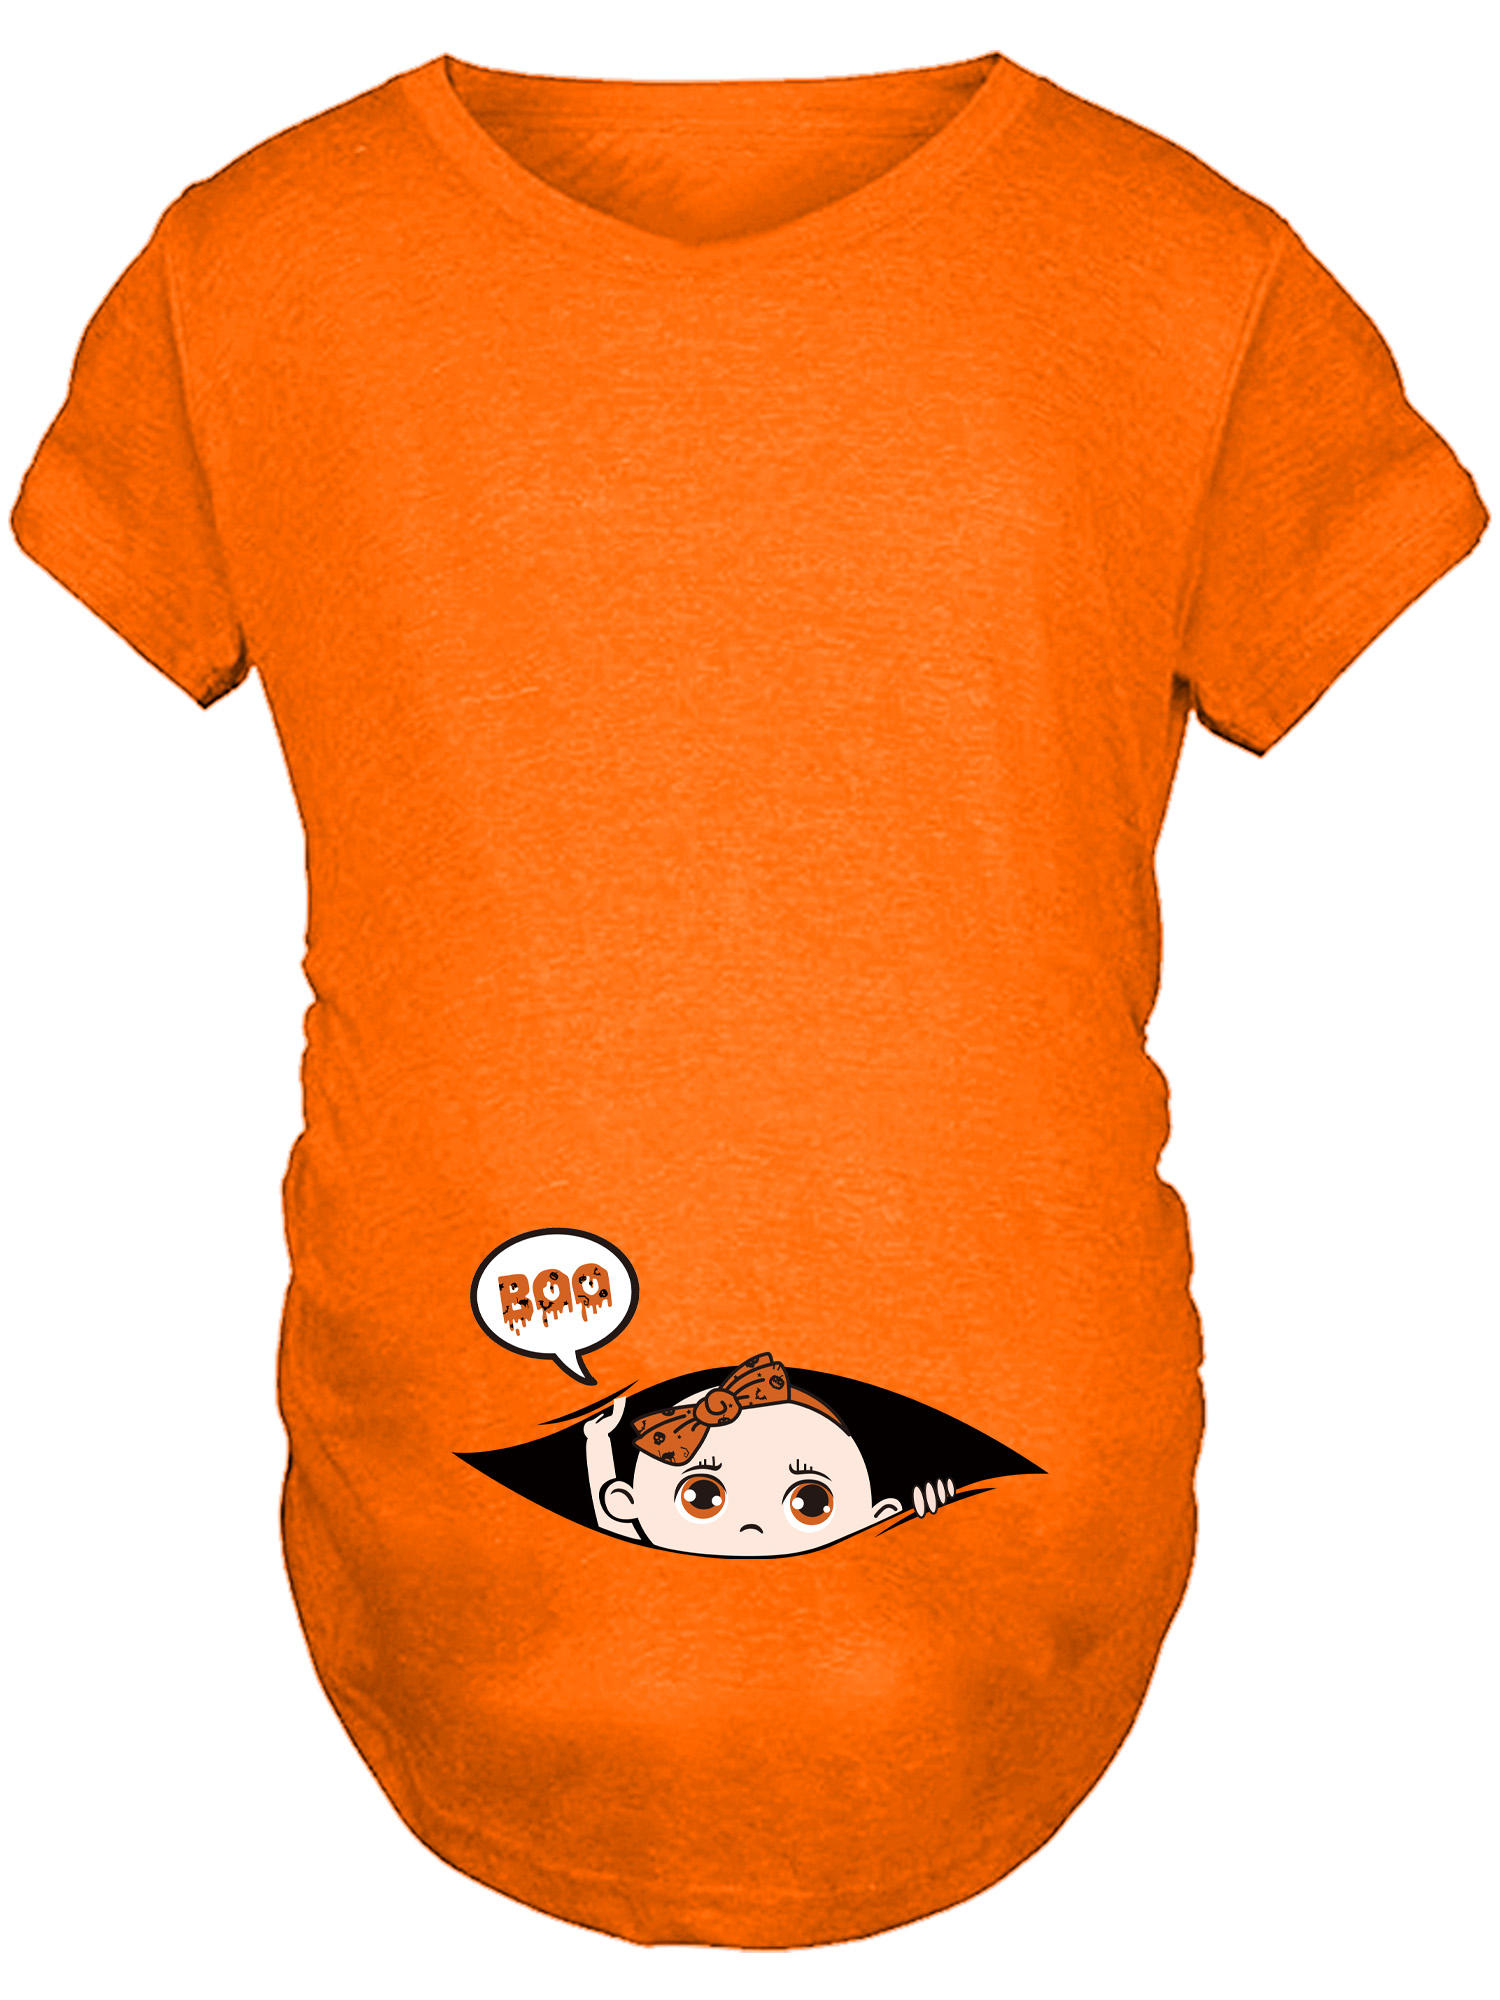 boo halloween funny print maternity t shirt blouse round neck short sleeve maternity top